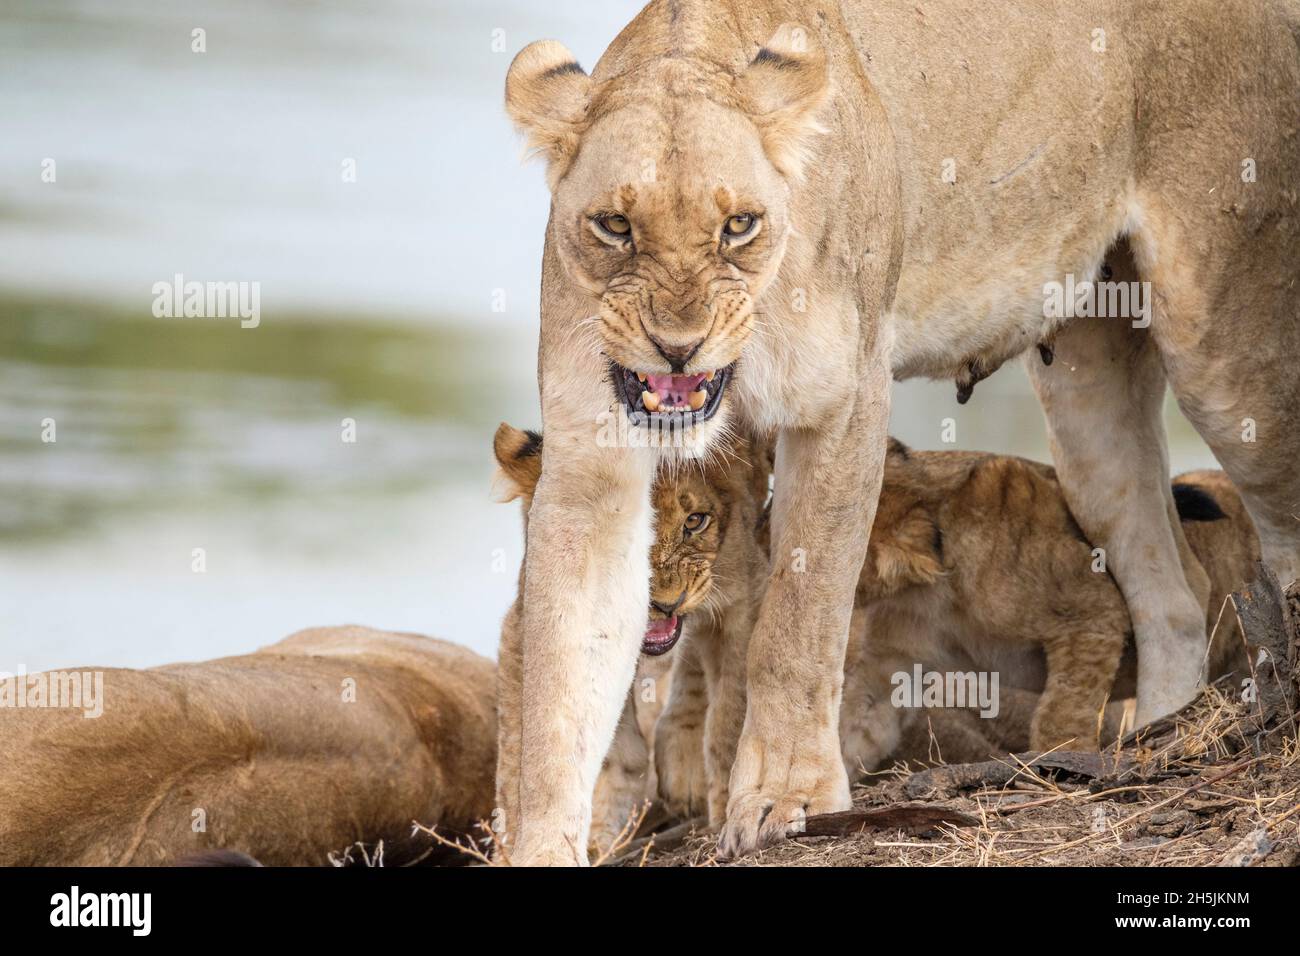 Lioness snarling, grumpy look (Panthera leo) front view. Female lion angry, front view. South Luangwa National Park, Zambia Stock Photo